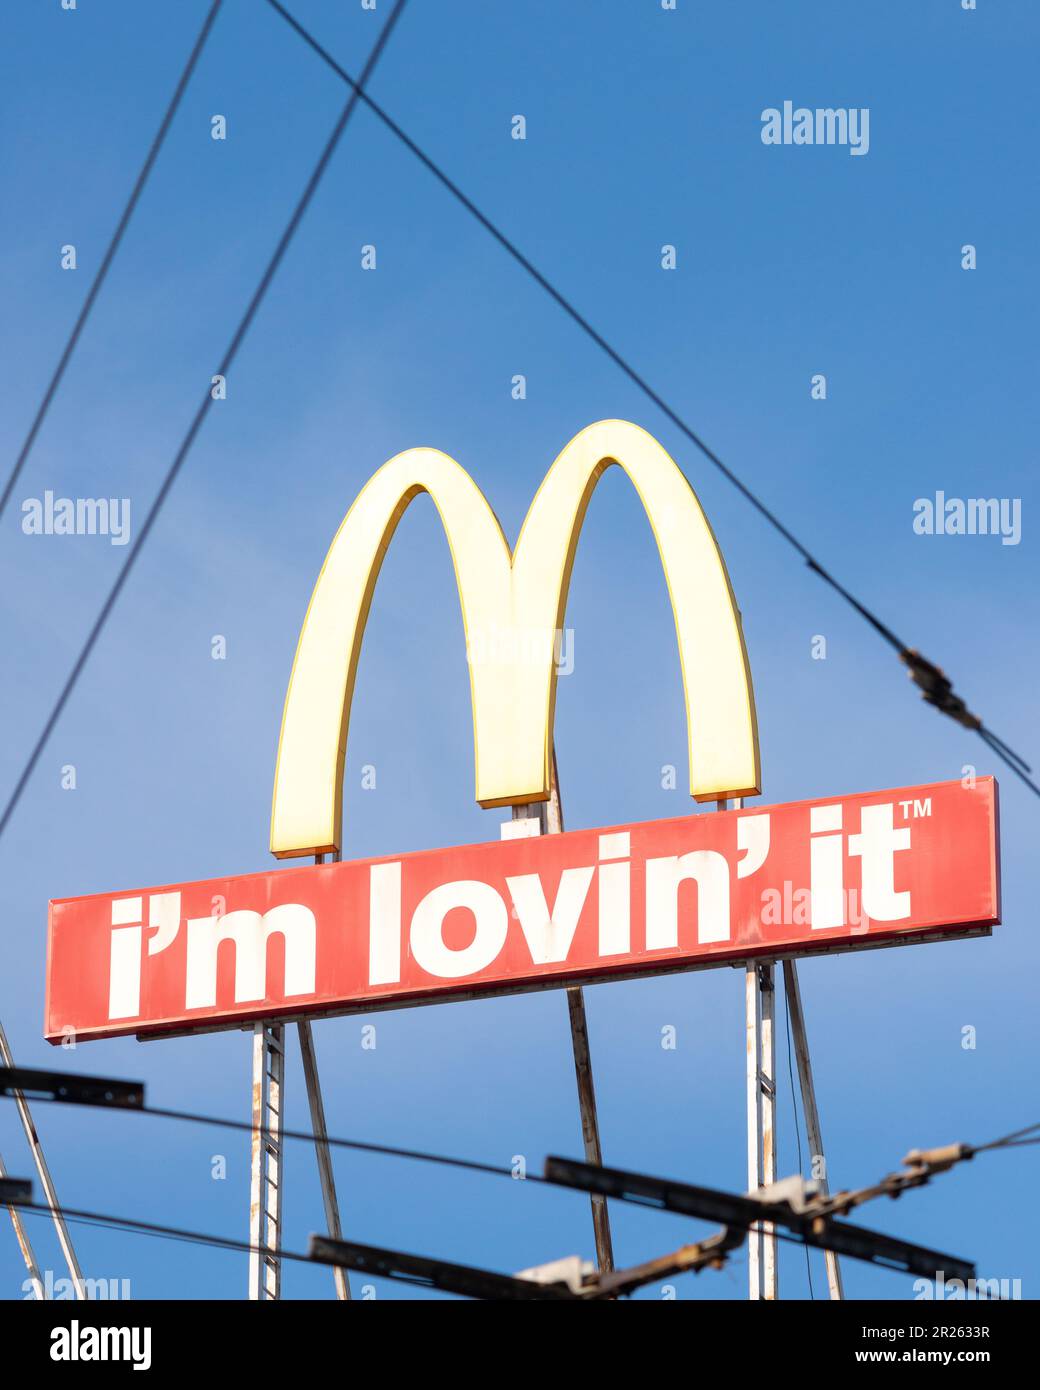 McDonald's logo and sign as seen through overhead lines or streetcar wires in urban environment Stock Photo